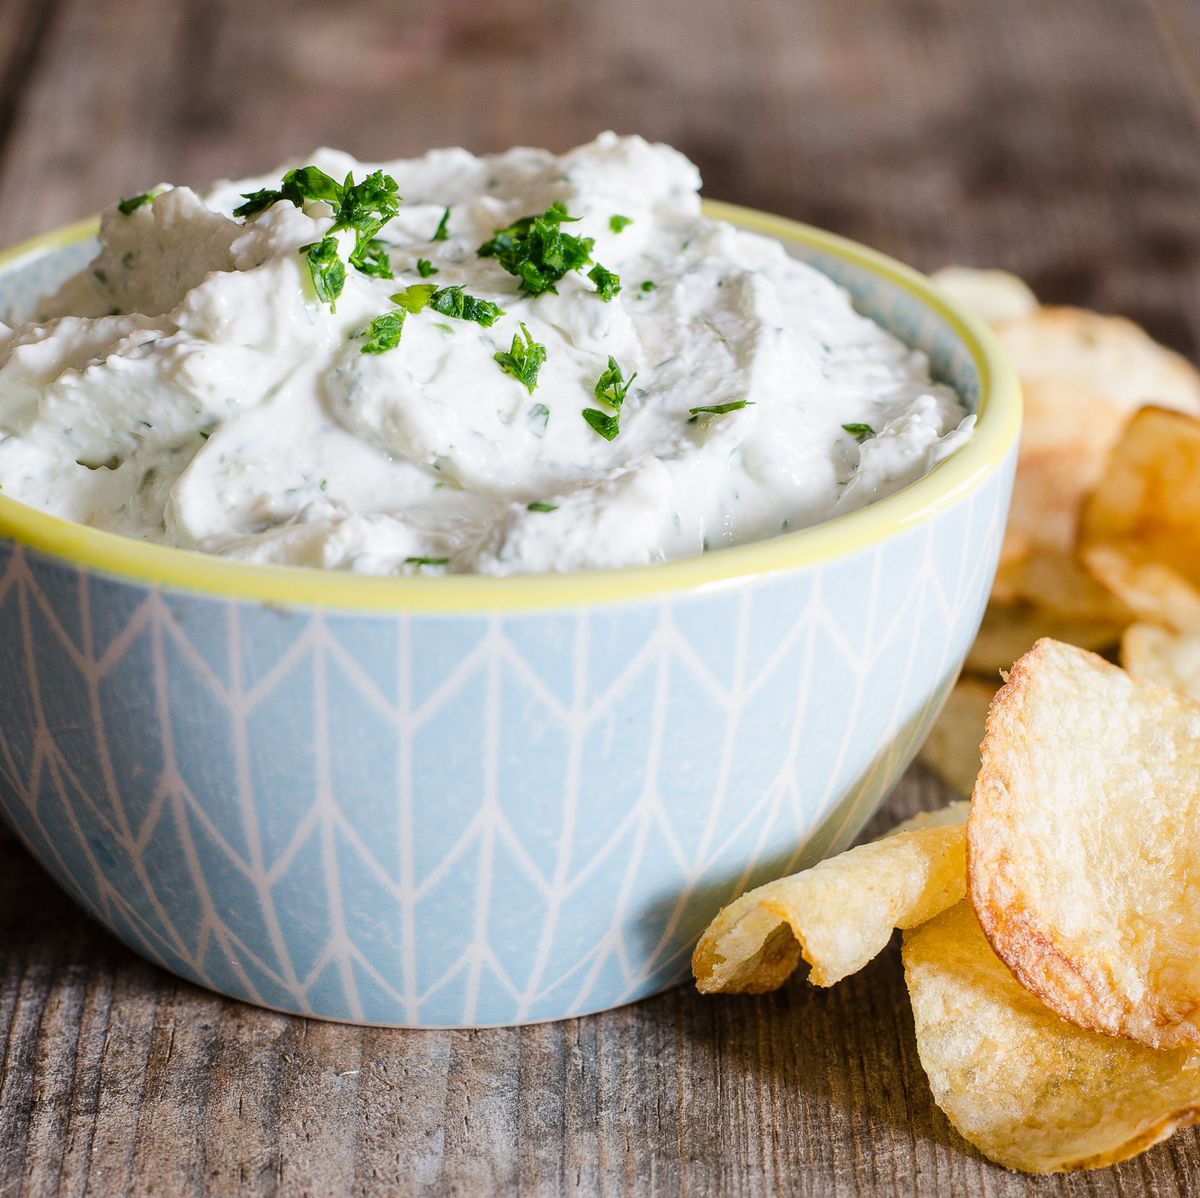 https://hips.hearstapps.com/thepioneerwoman/wp-content/uploads/2016/01/homemade-french-onion-chip-dip-01.jpg?crop=0.668xw:1.00xh;0.0753xw,0&resize=1200:*